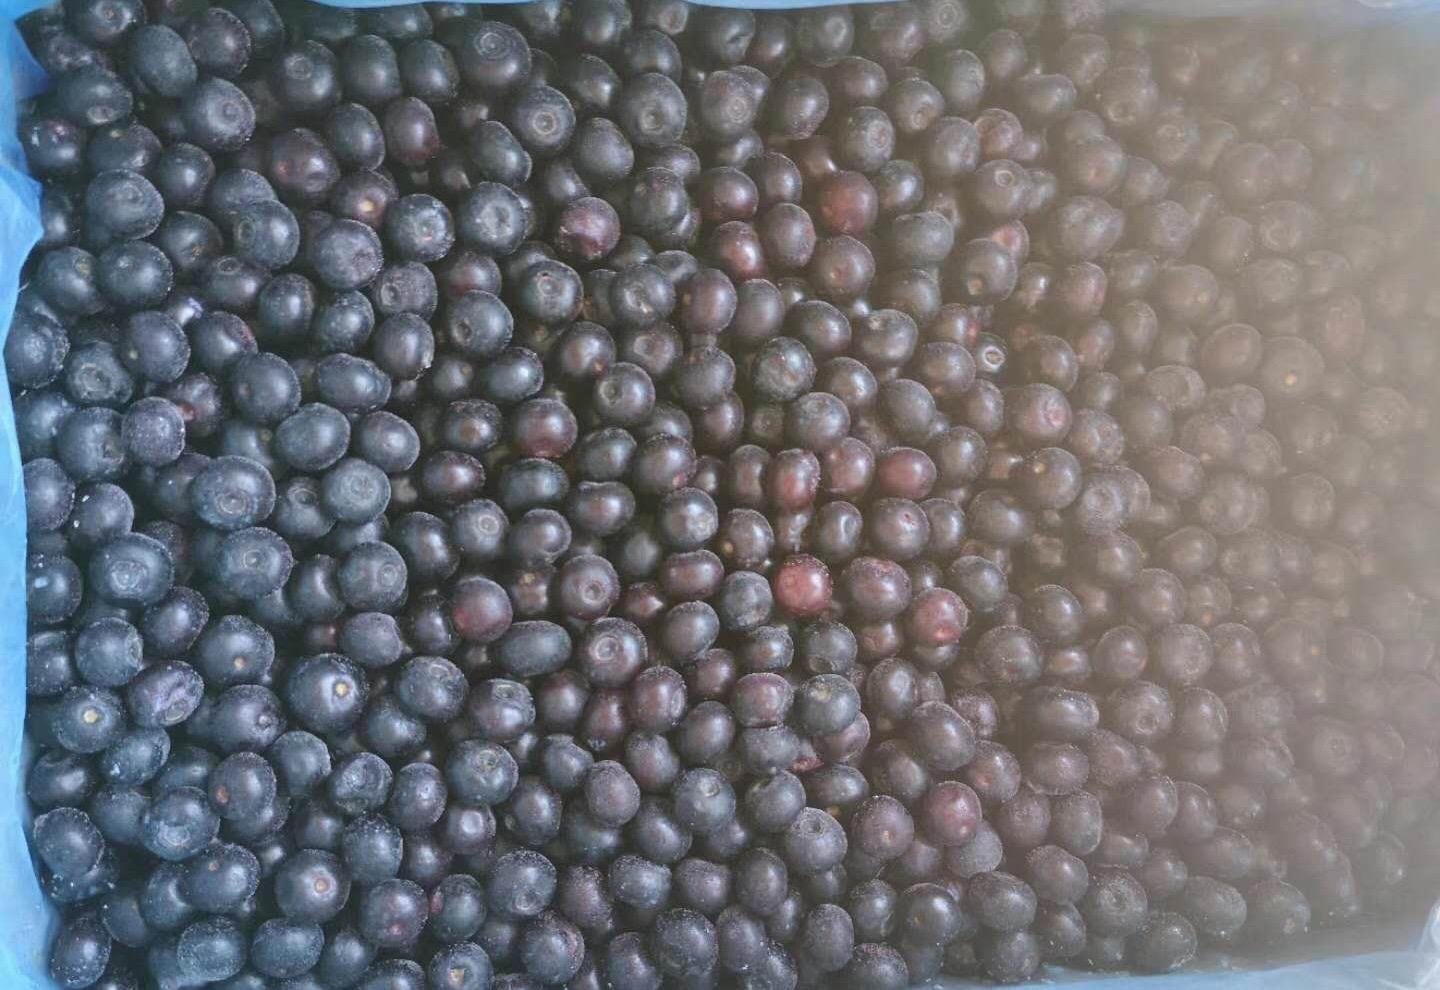 IQF blueberry,IQF Blueberries,Frozen Blueberries,cultivated 2